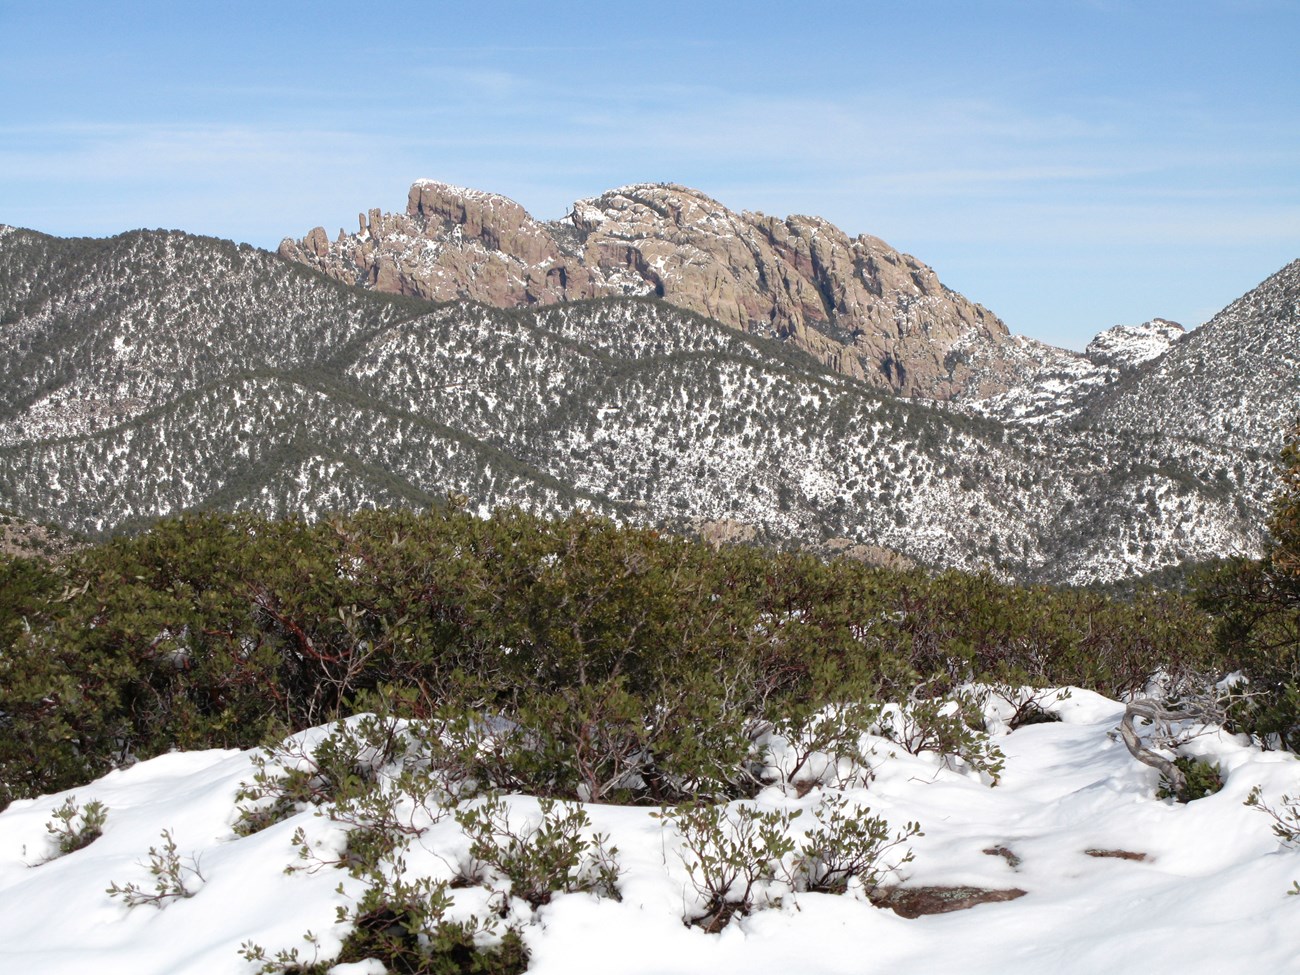 A bald, rocky mountain (Cochise Head) rises above snowy hills.